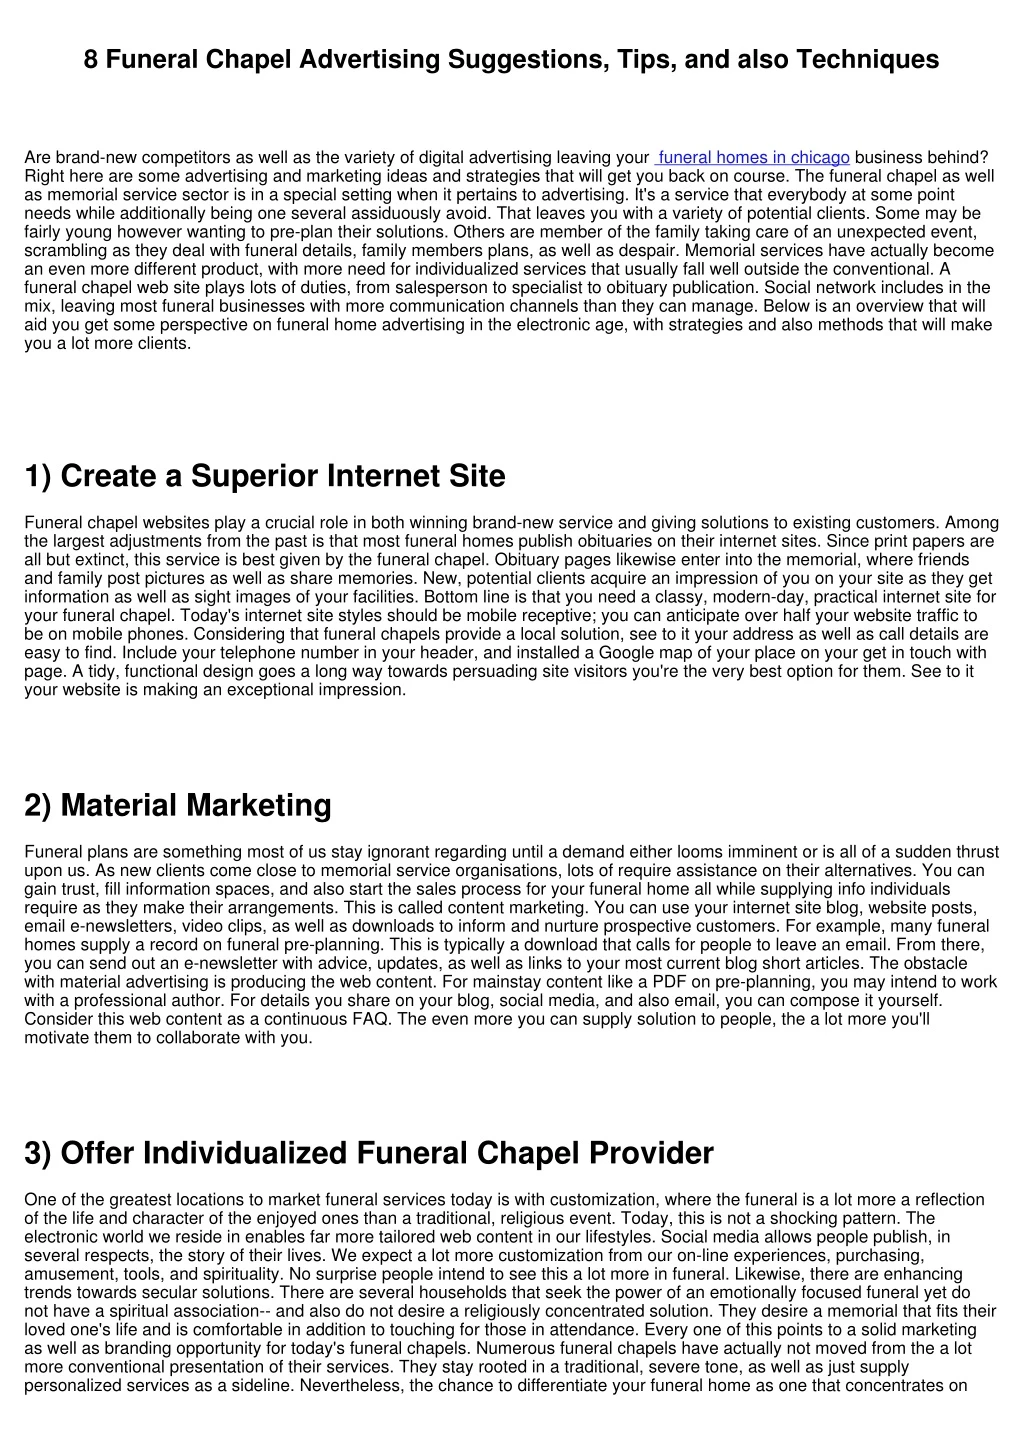 8 funeral chapel advertising suggestions tips